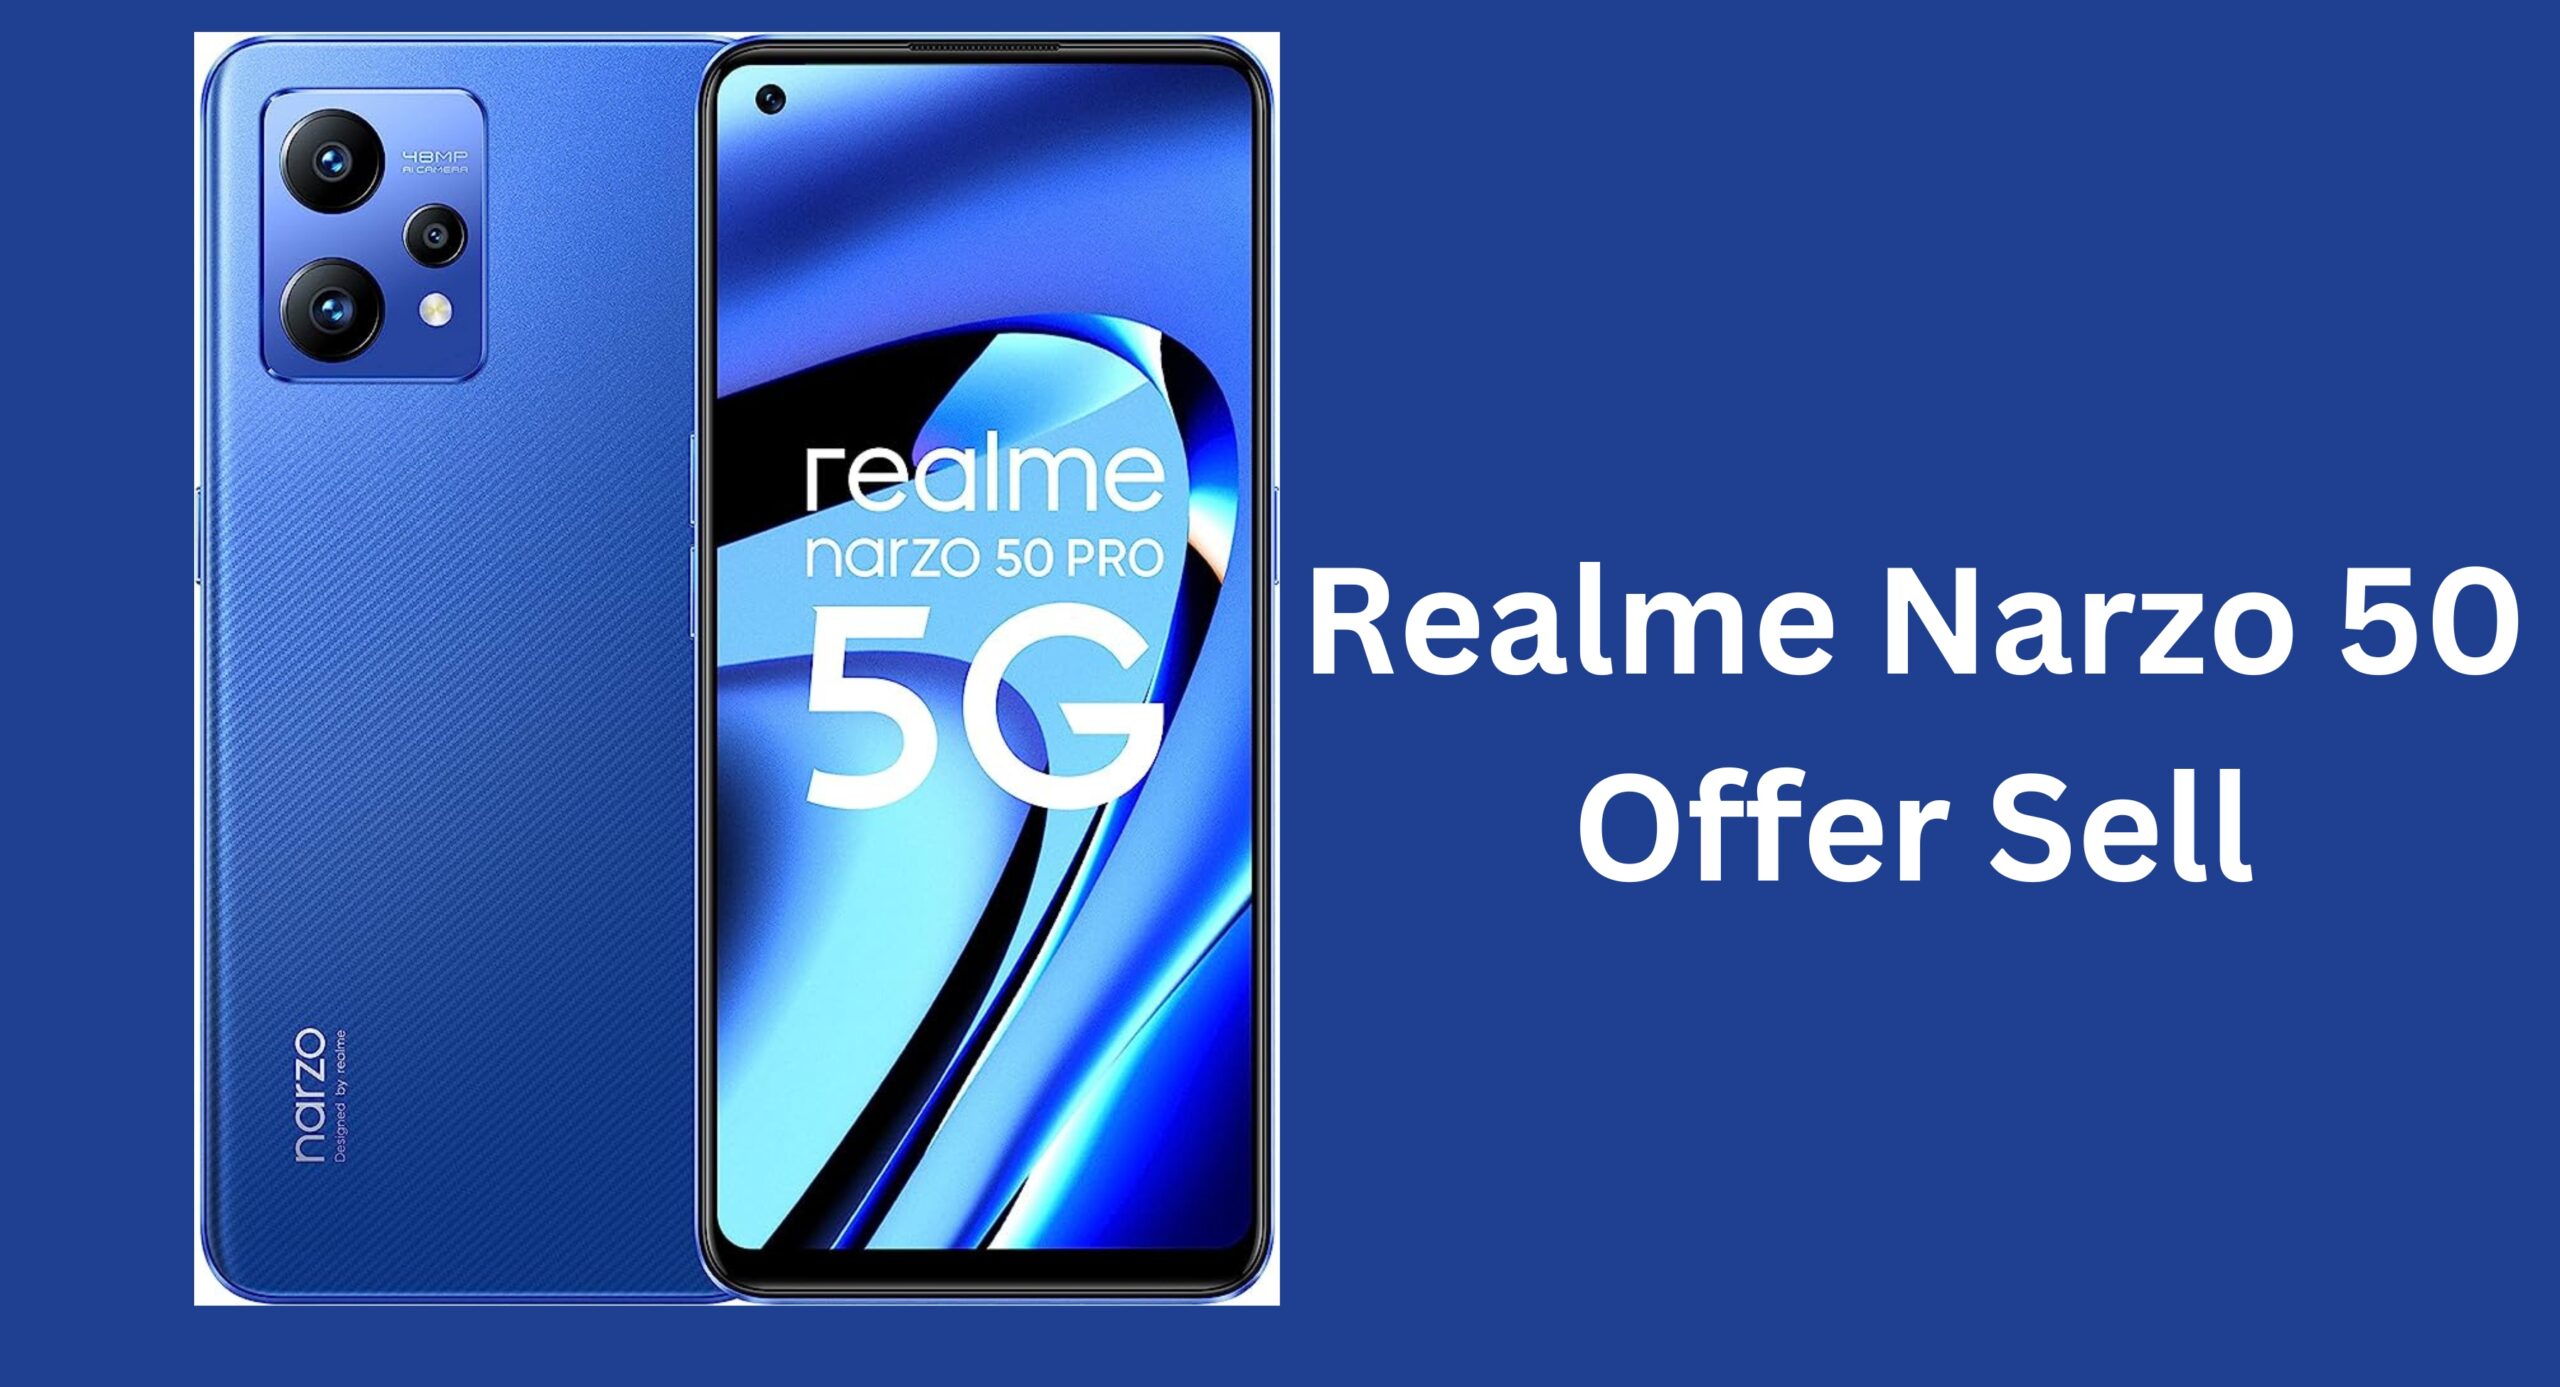 Realme Narzo 50 Offer Sell